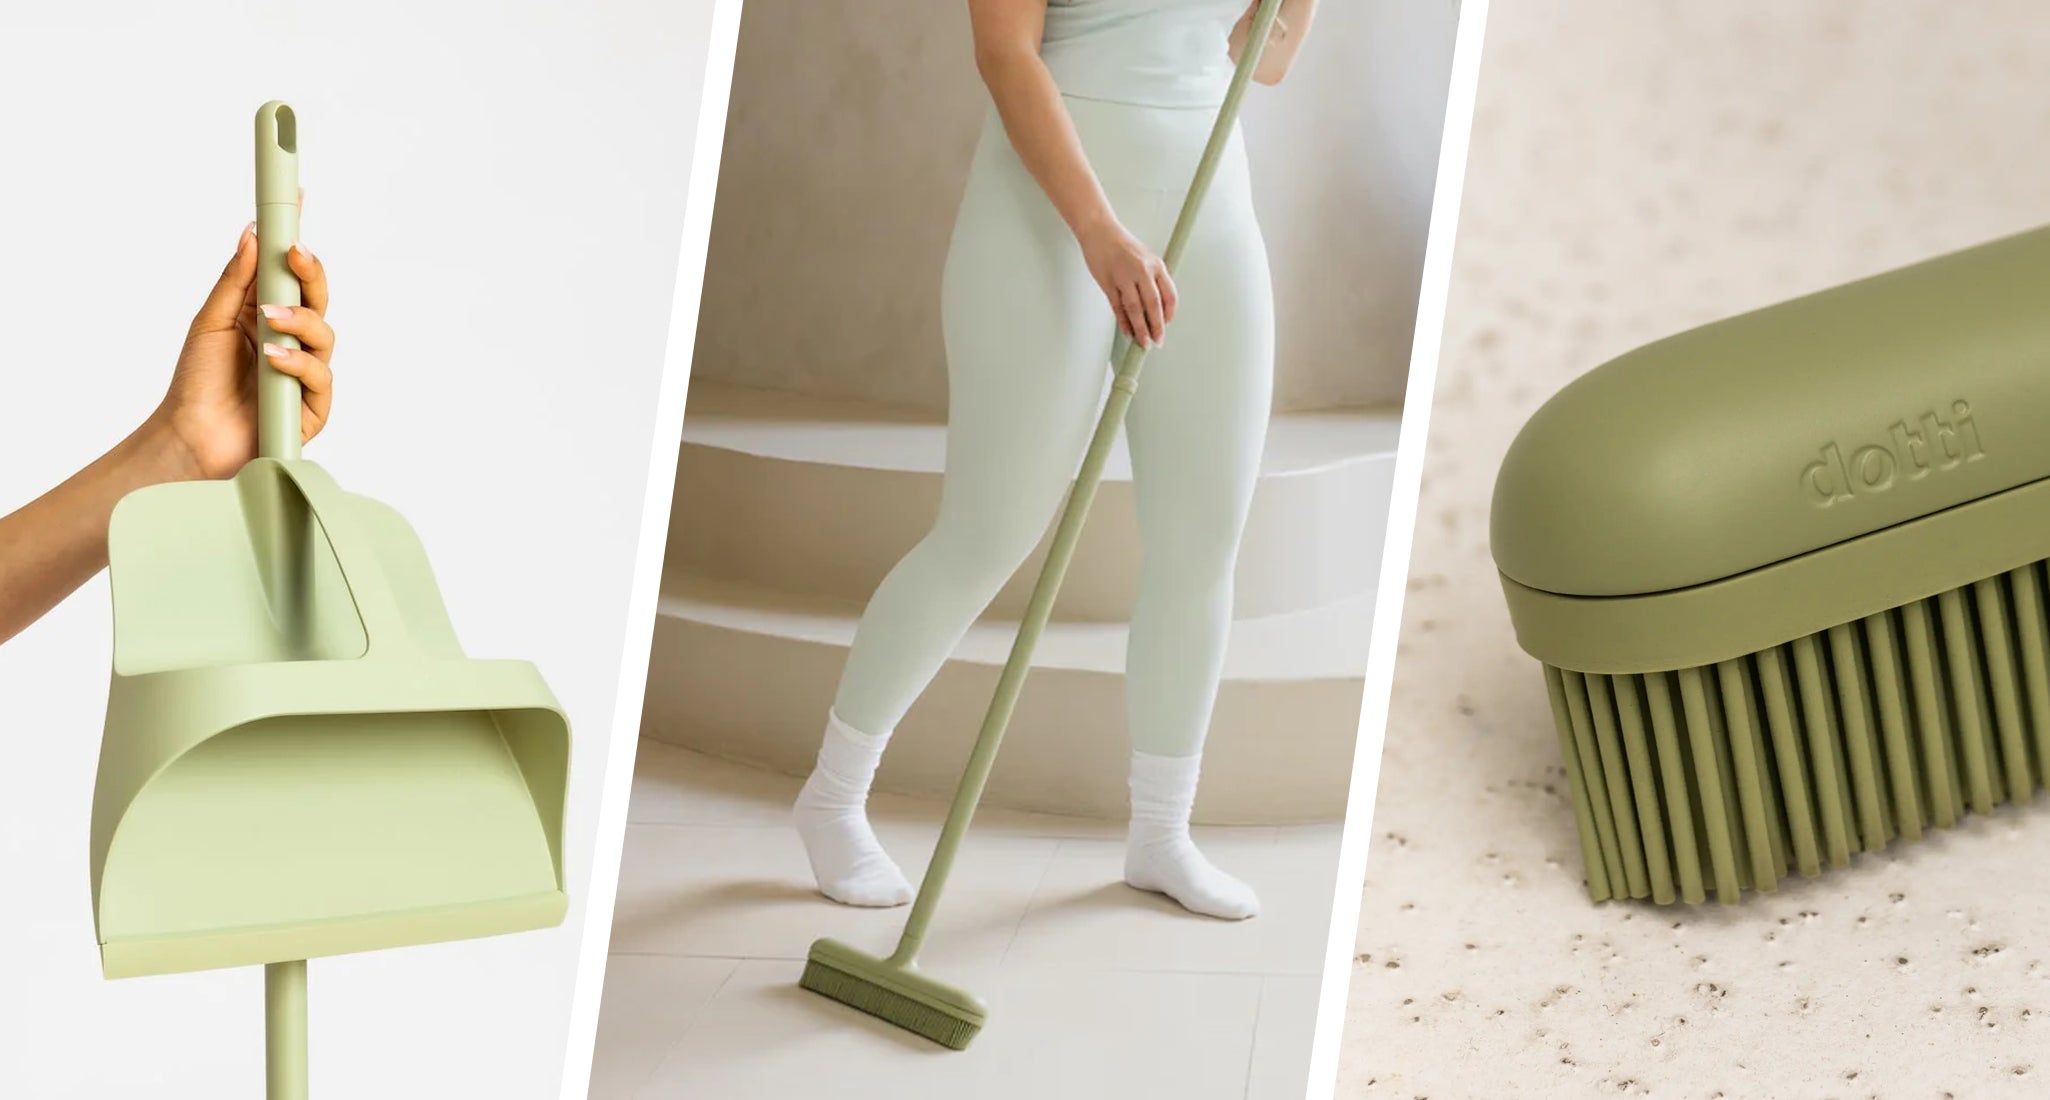 PureWow | I’m a Total Neat Freak: Here’s Why the Dotti Broom Is Giving Me So Much Joy